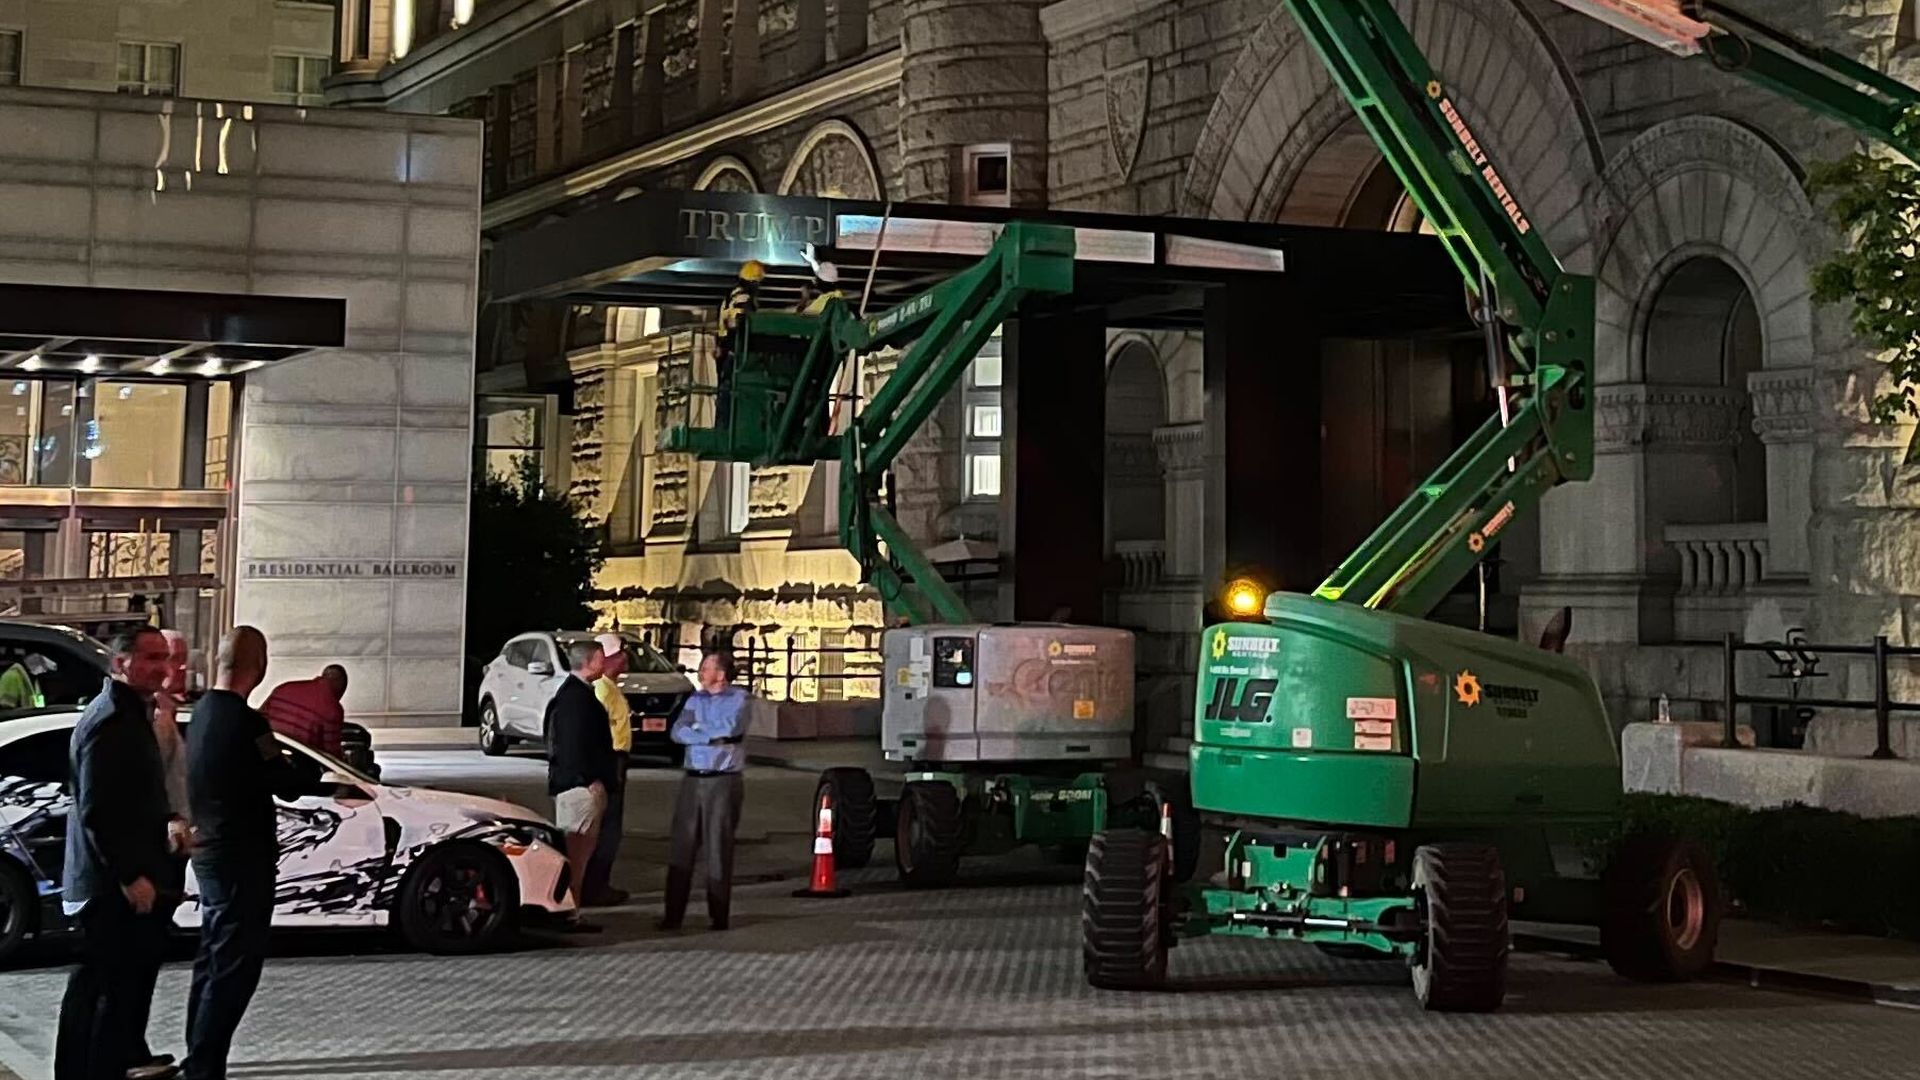 Hours after the Trump Organization's sale was complete, half a dozen workers were dismantling signs from the facade of the building in Washington, D.C.